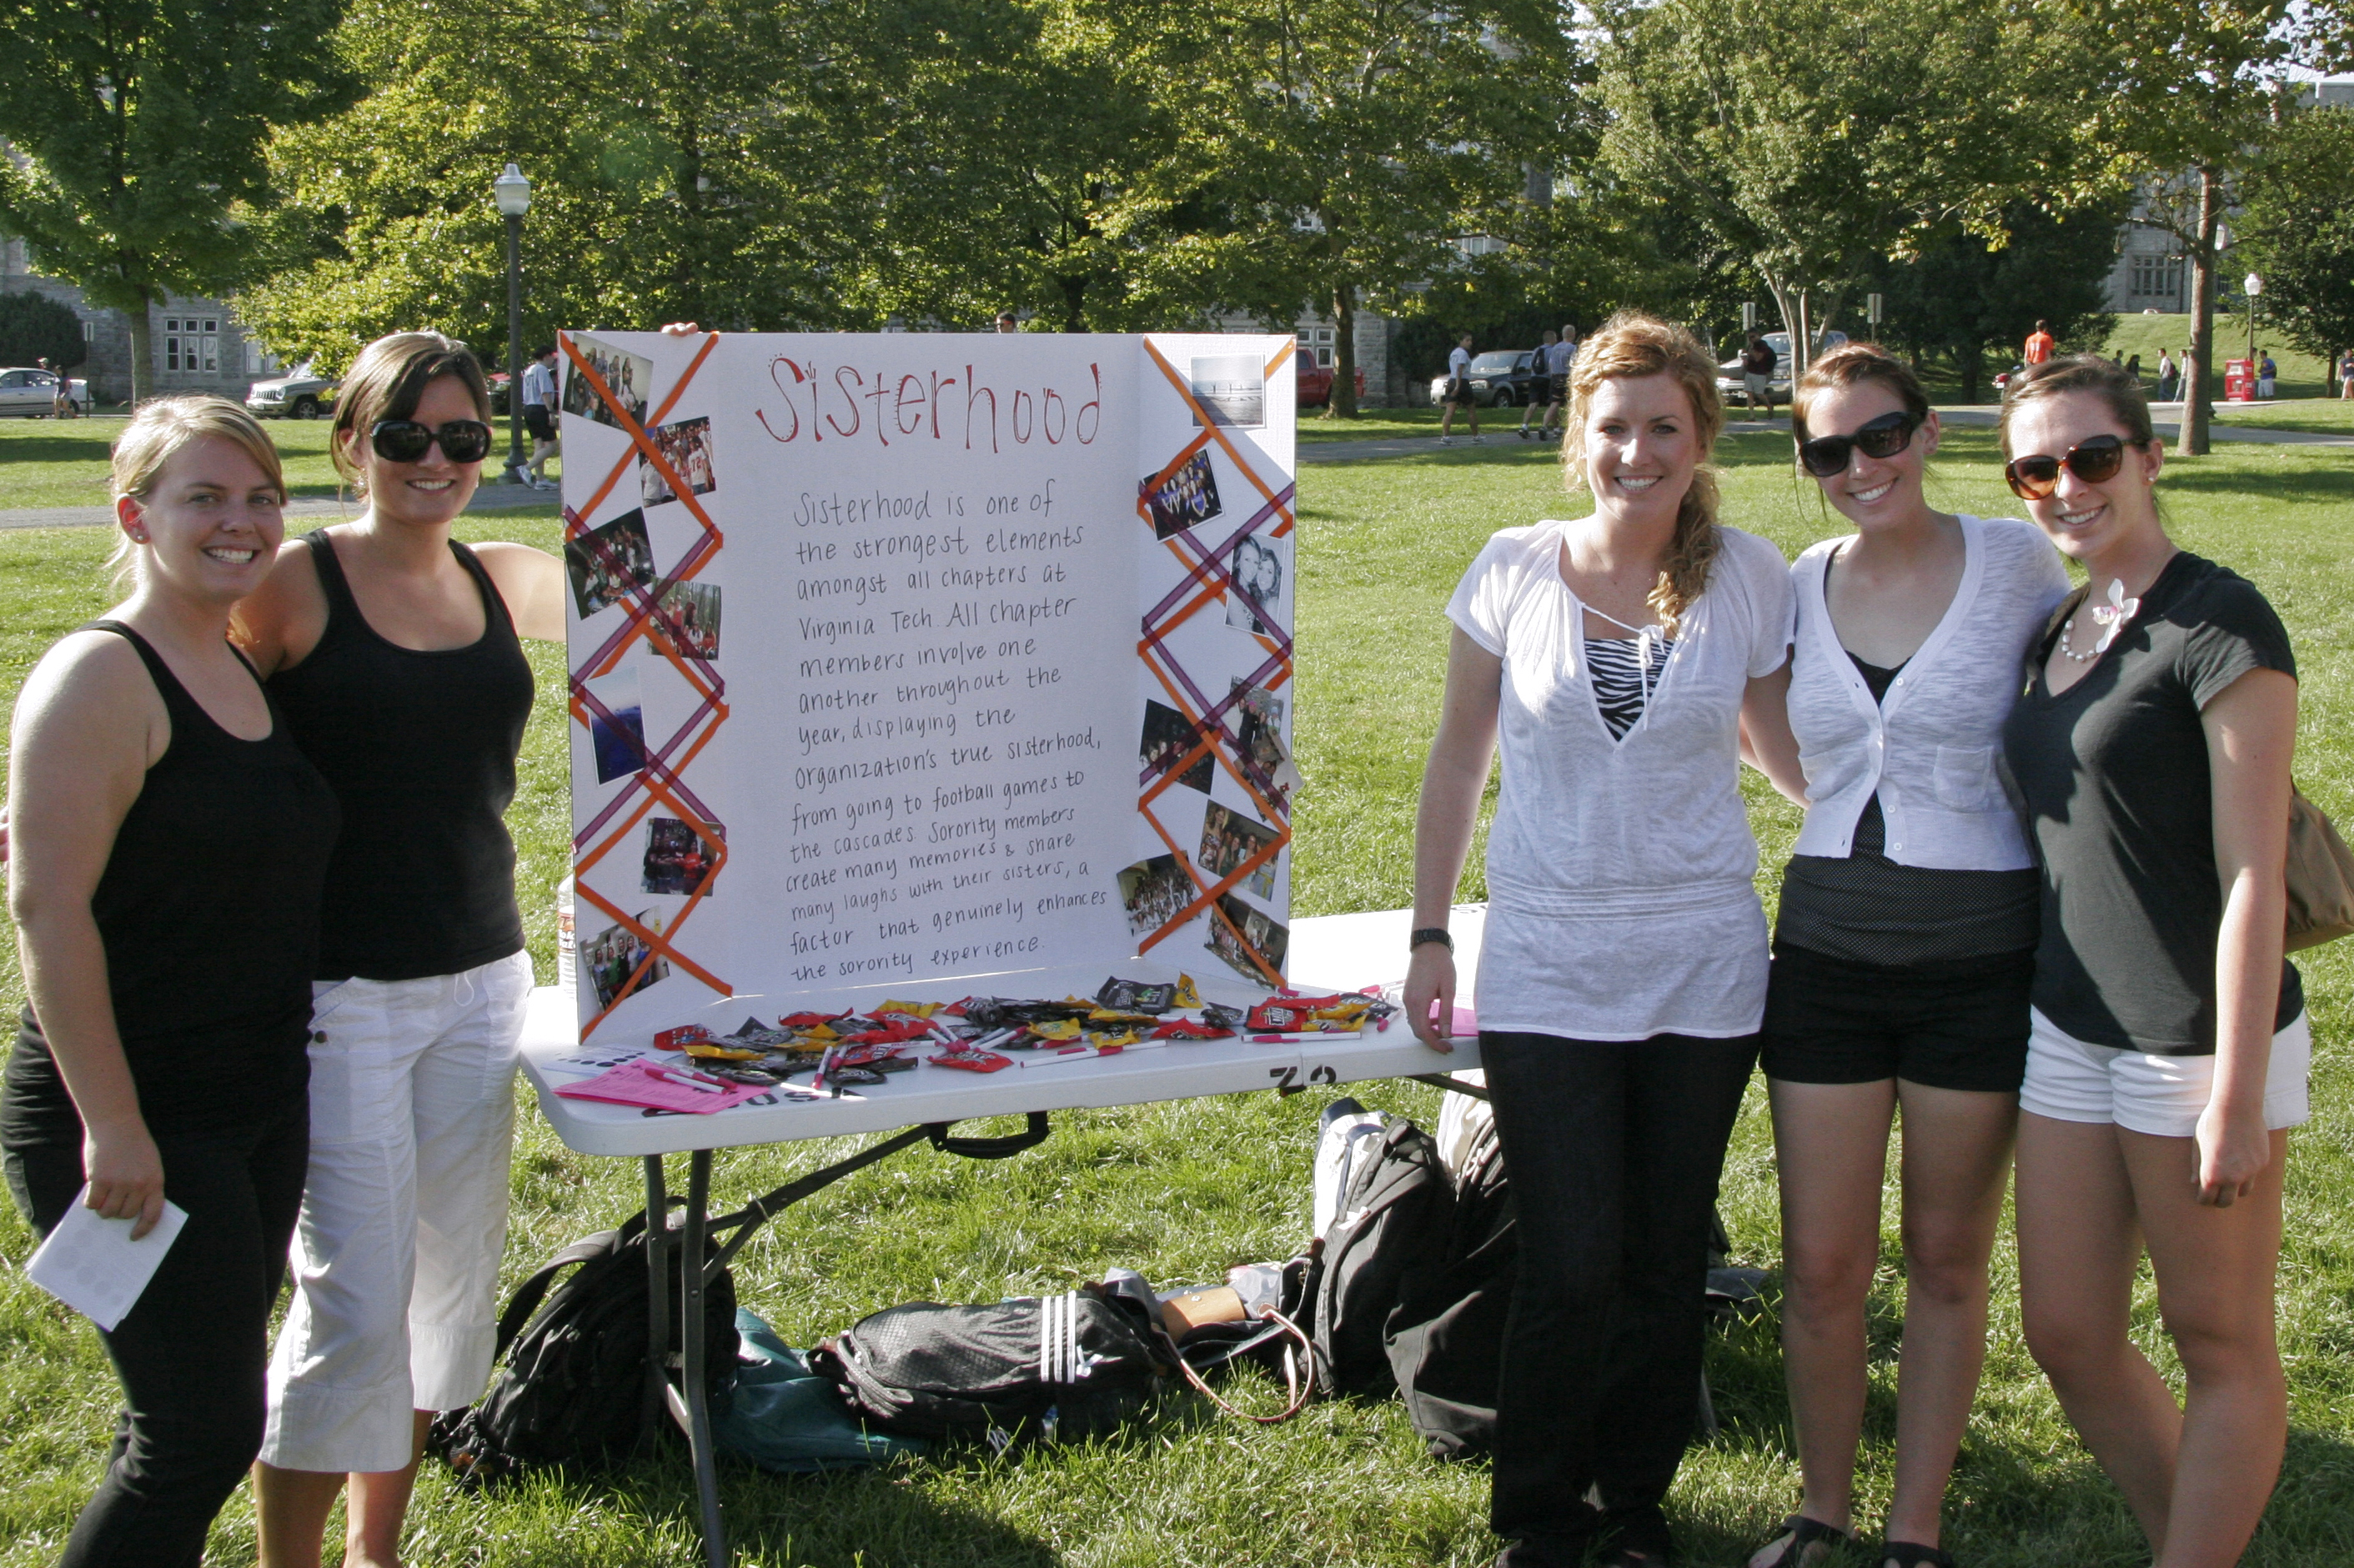 Five sorority women stand on the Drillfield with a sisterhood display.